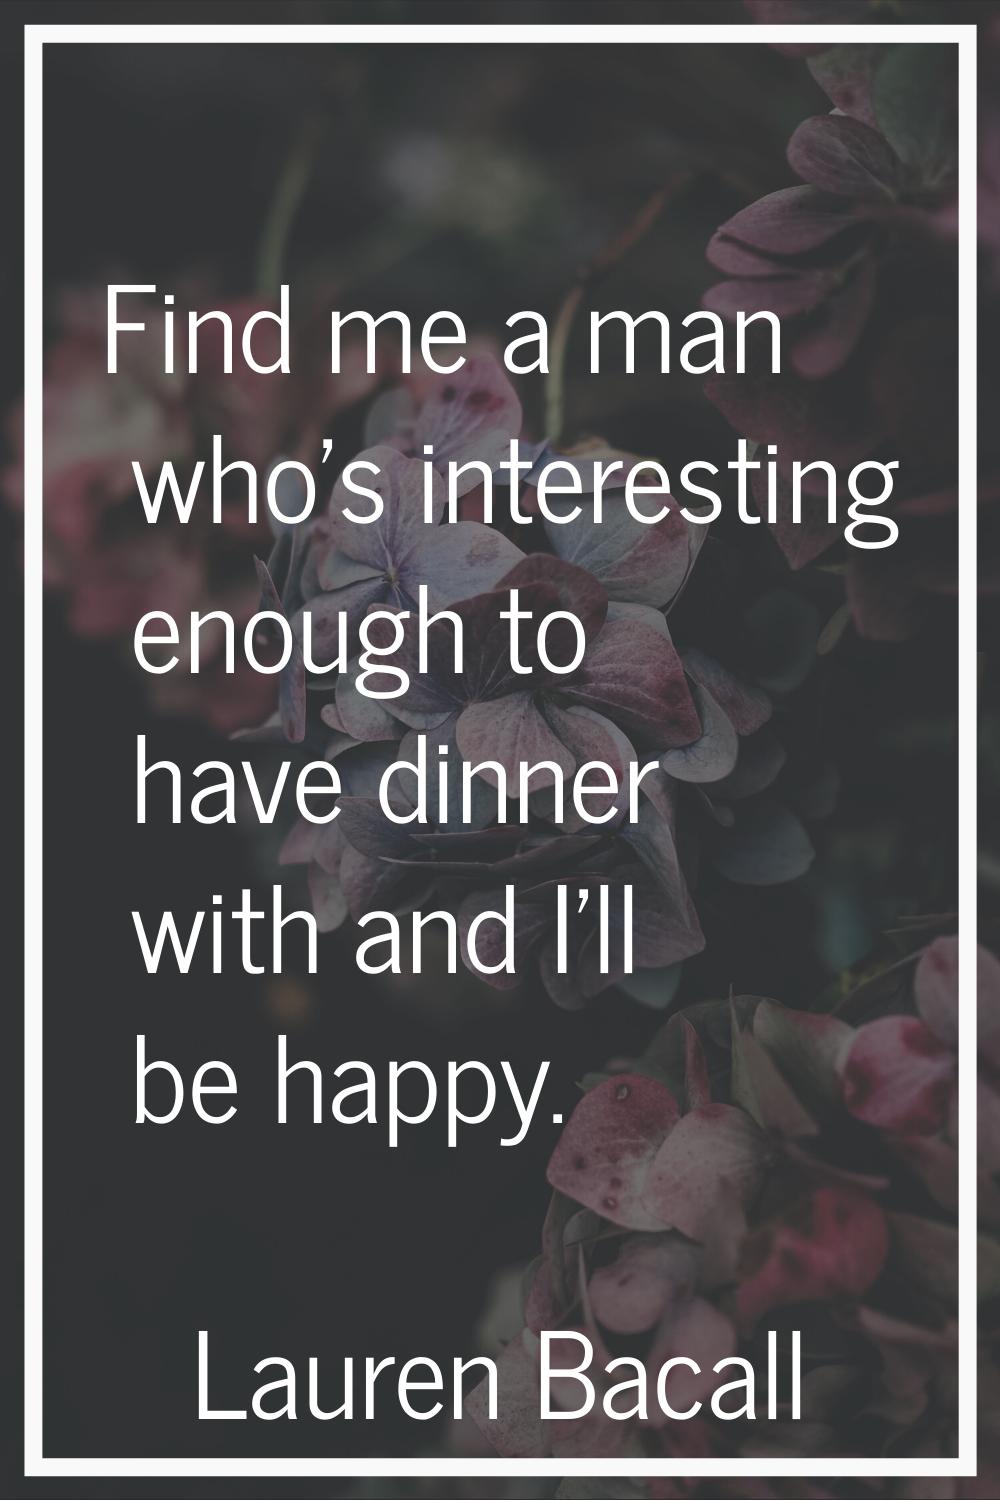 Find me a man who's interesting enough to have dinner with and I'll be happy.